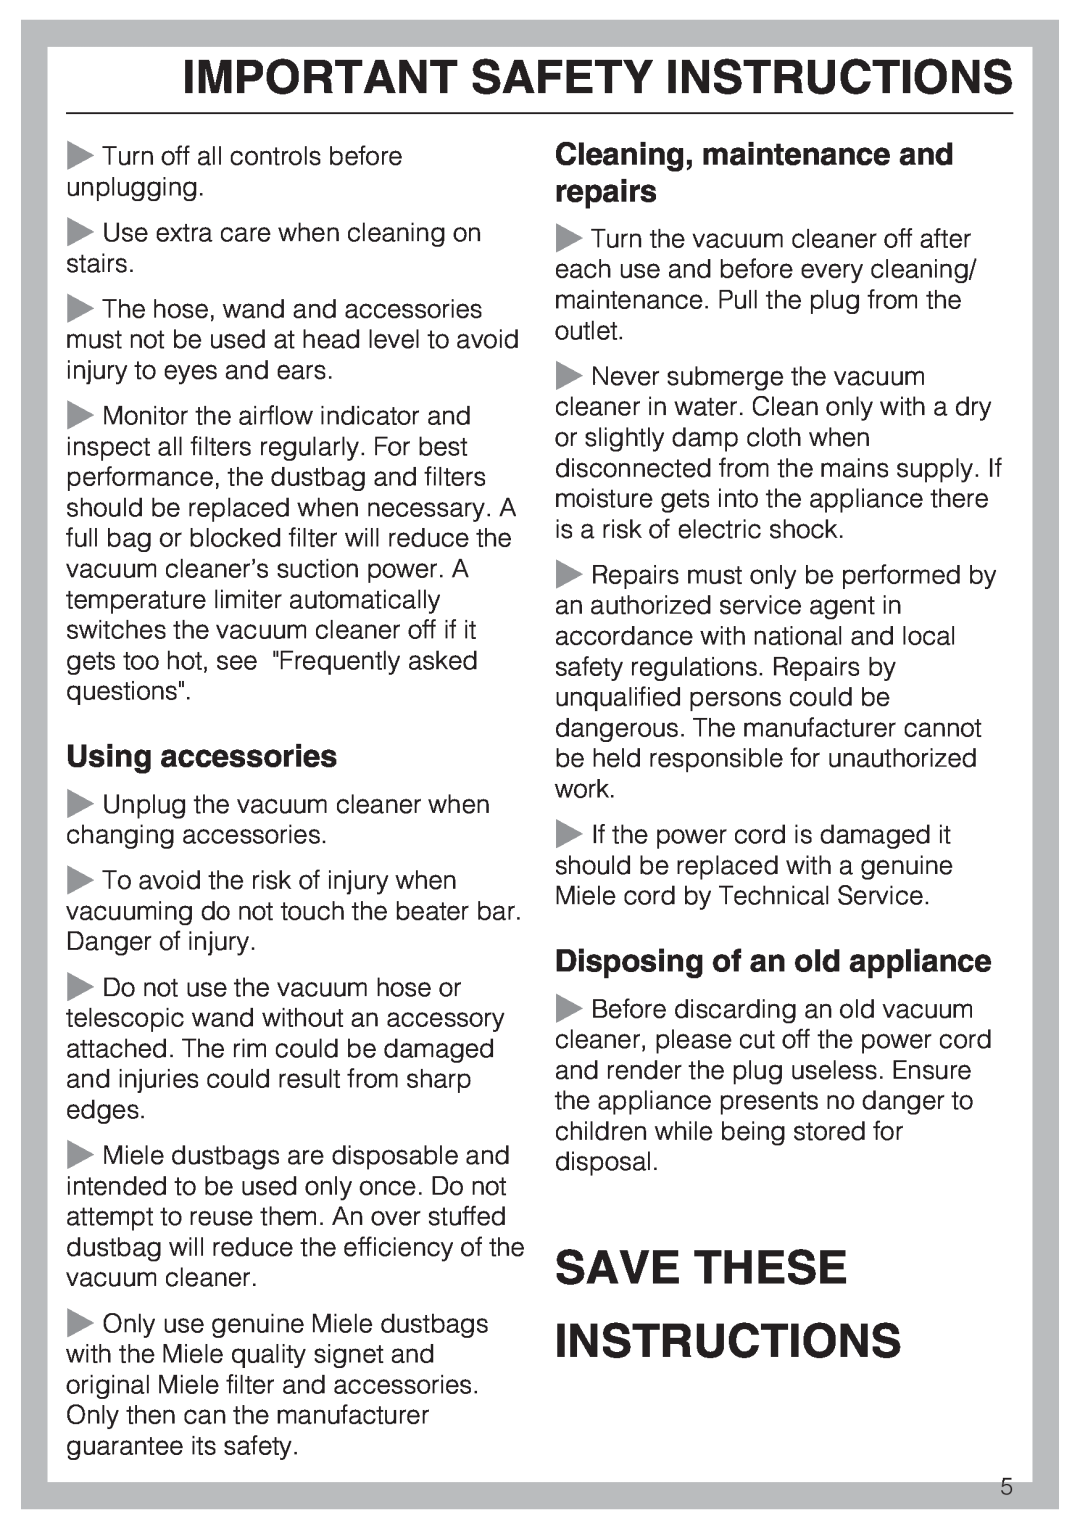 Miele S 7000 Save These Instructions, Using accessories, Cleaning, maintenance and repairs, Disposing of an old appliance 